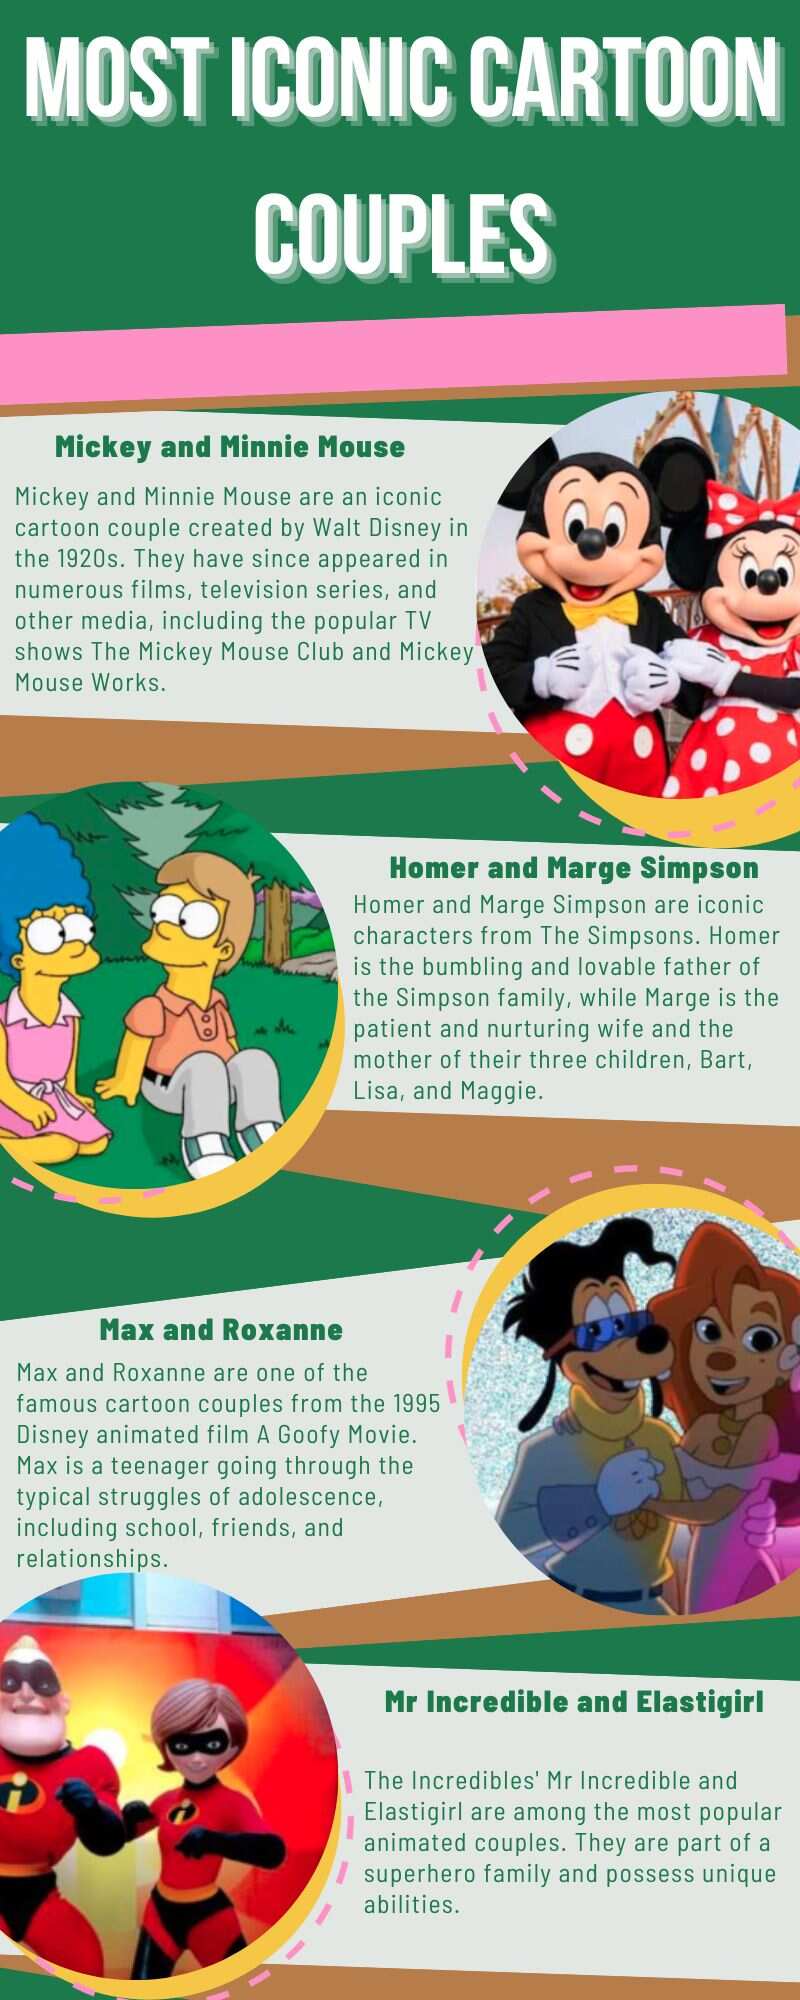 Most iconic cartoon couples